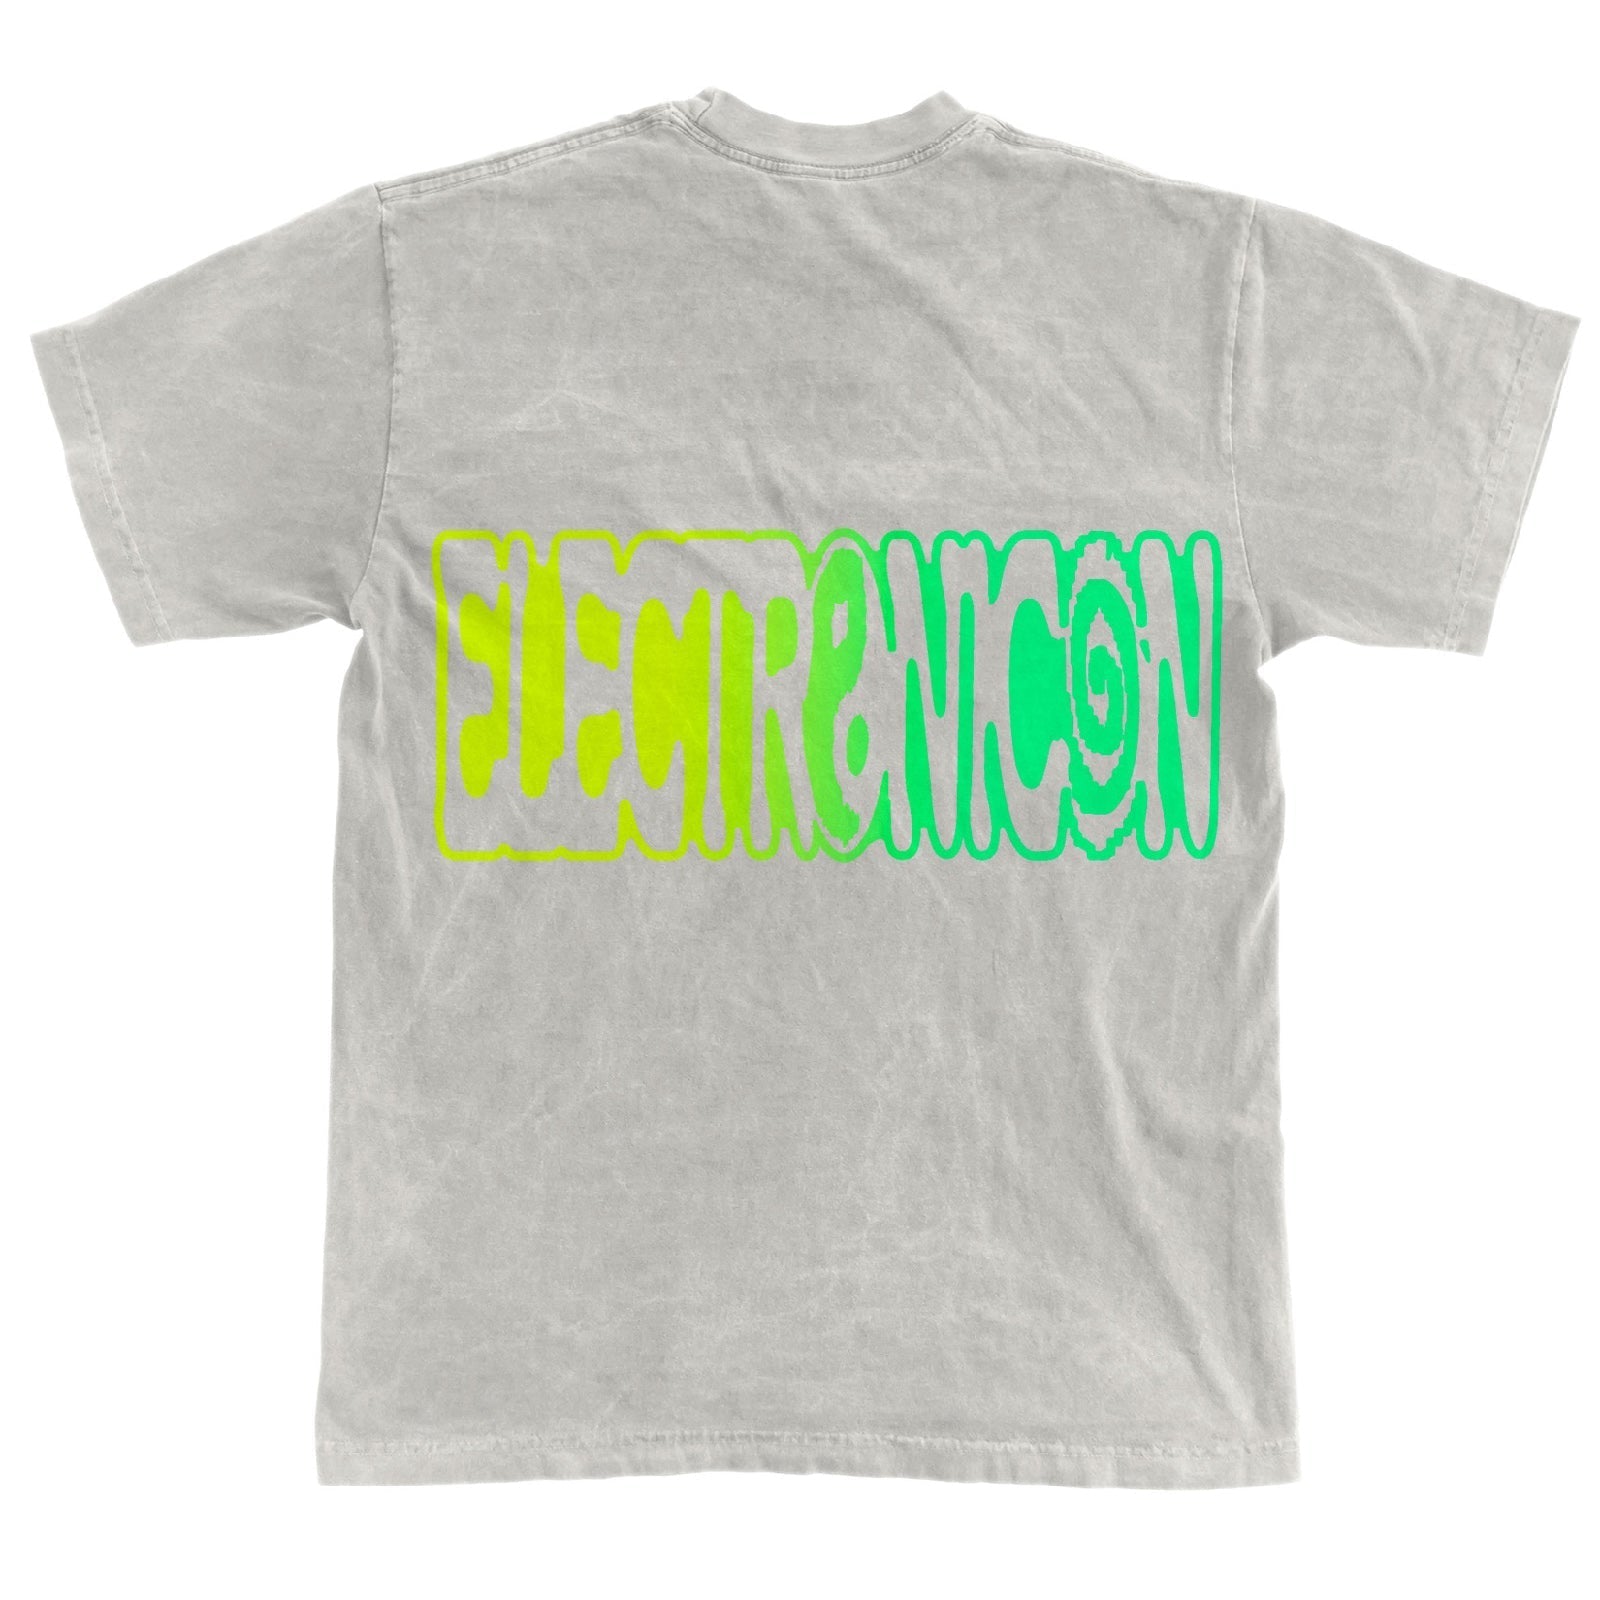 100% ElectroniCON - ElectroniCON T-Shirt by Extra Vitamins - Grey - 100% Electronica Official Store (Photo 2)